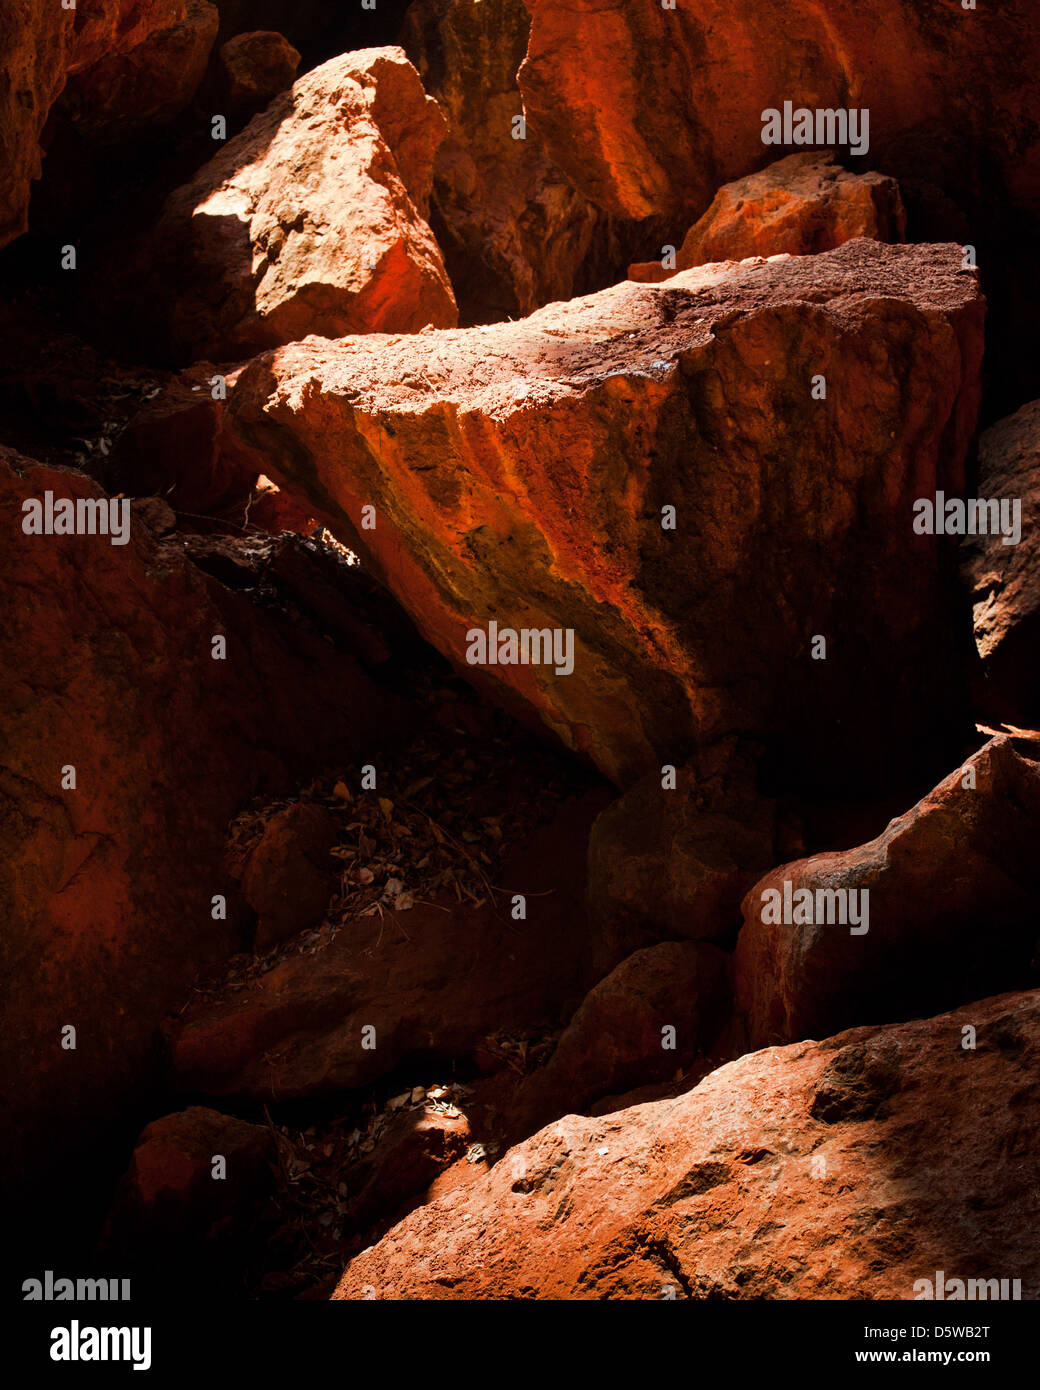 Colorful texture of rocks inside mountain cave darkness Stock Photo